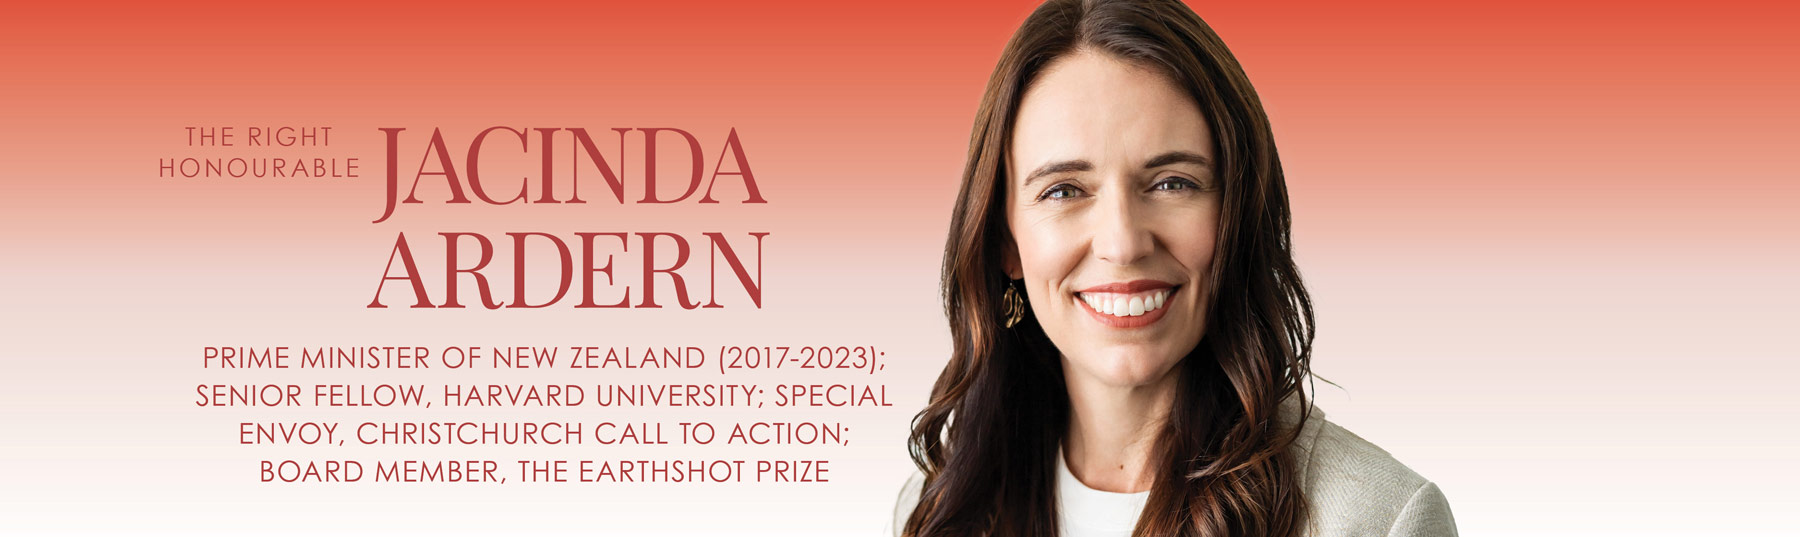 Join The Right Honourable Jacinda Ardern at the Texas Conference for Women this November 16th!